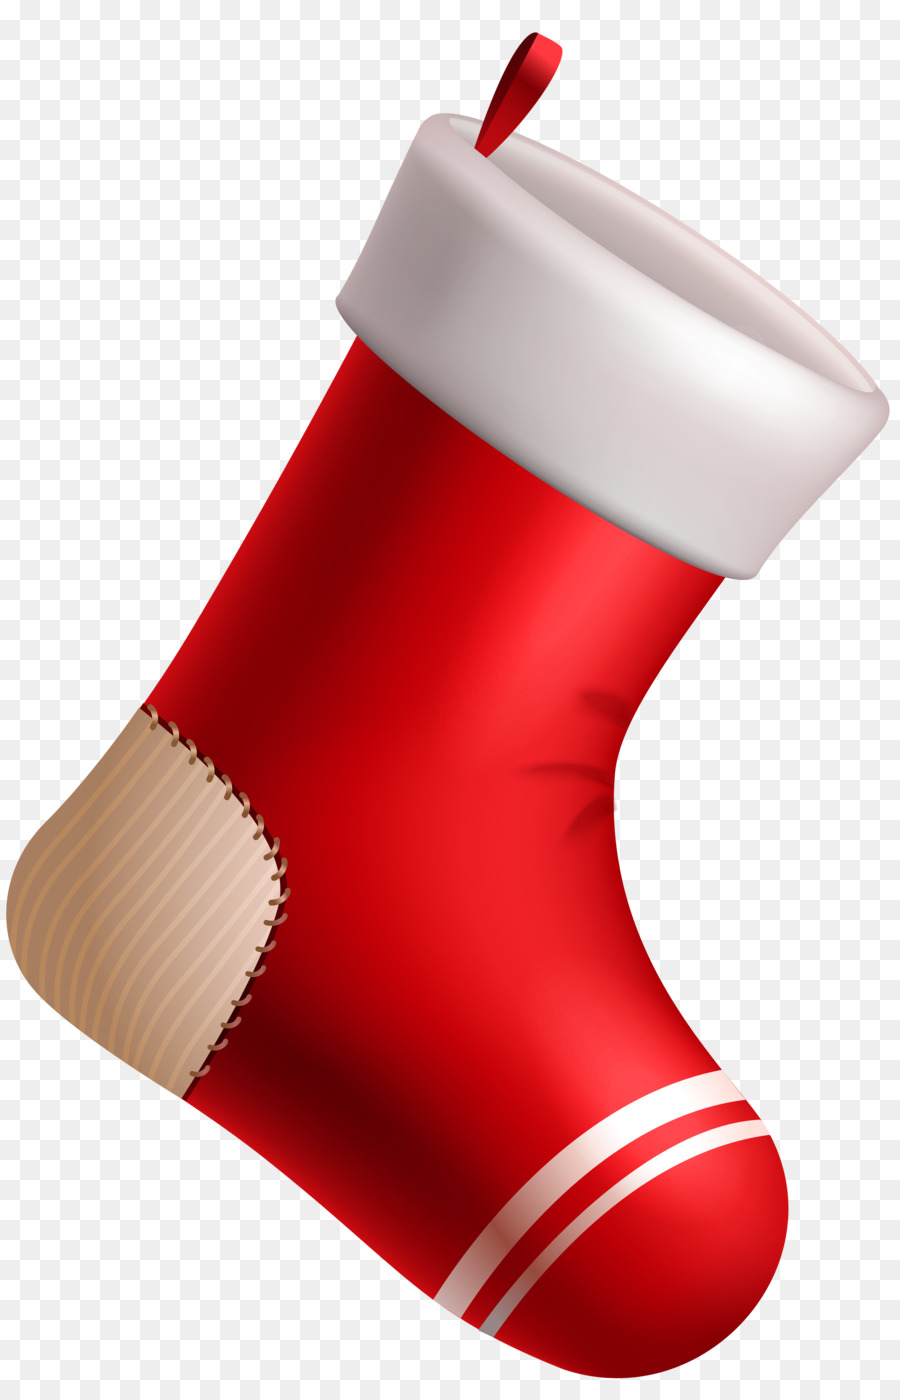 Christmas Stockings Clip art - Pin png download - 4020*6252 - Free Transparent Christmas Stockings png Download.